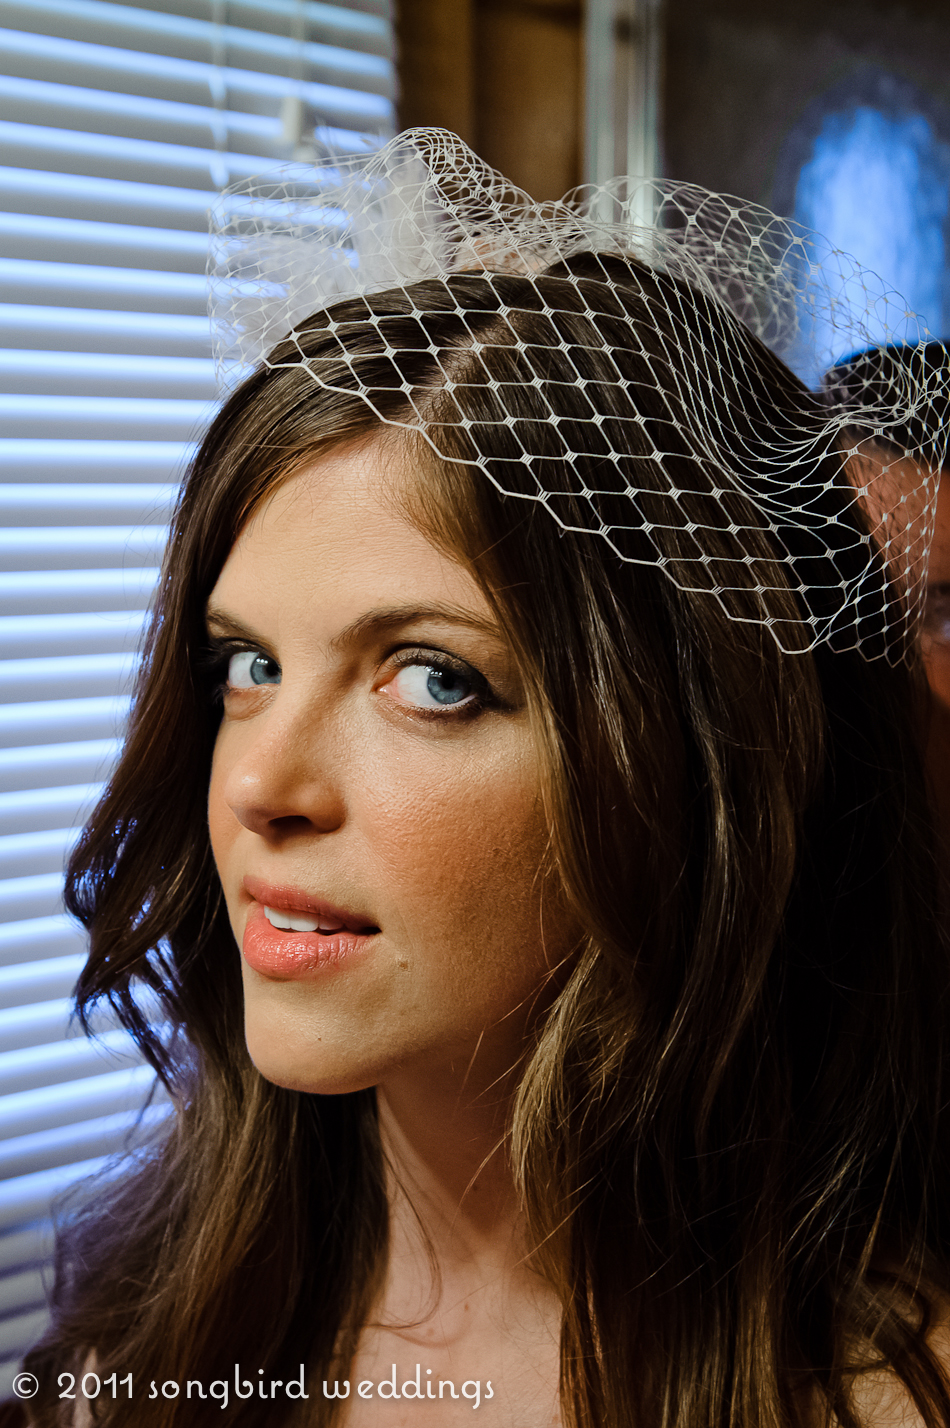 Close up of bride getting ready - wearing veil